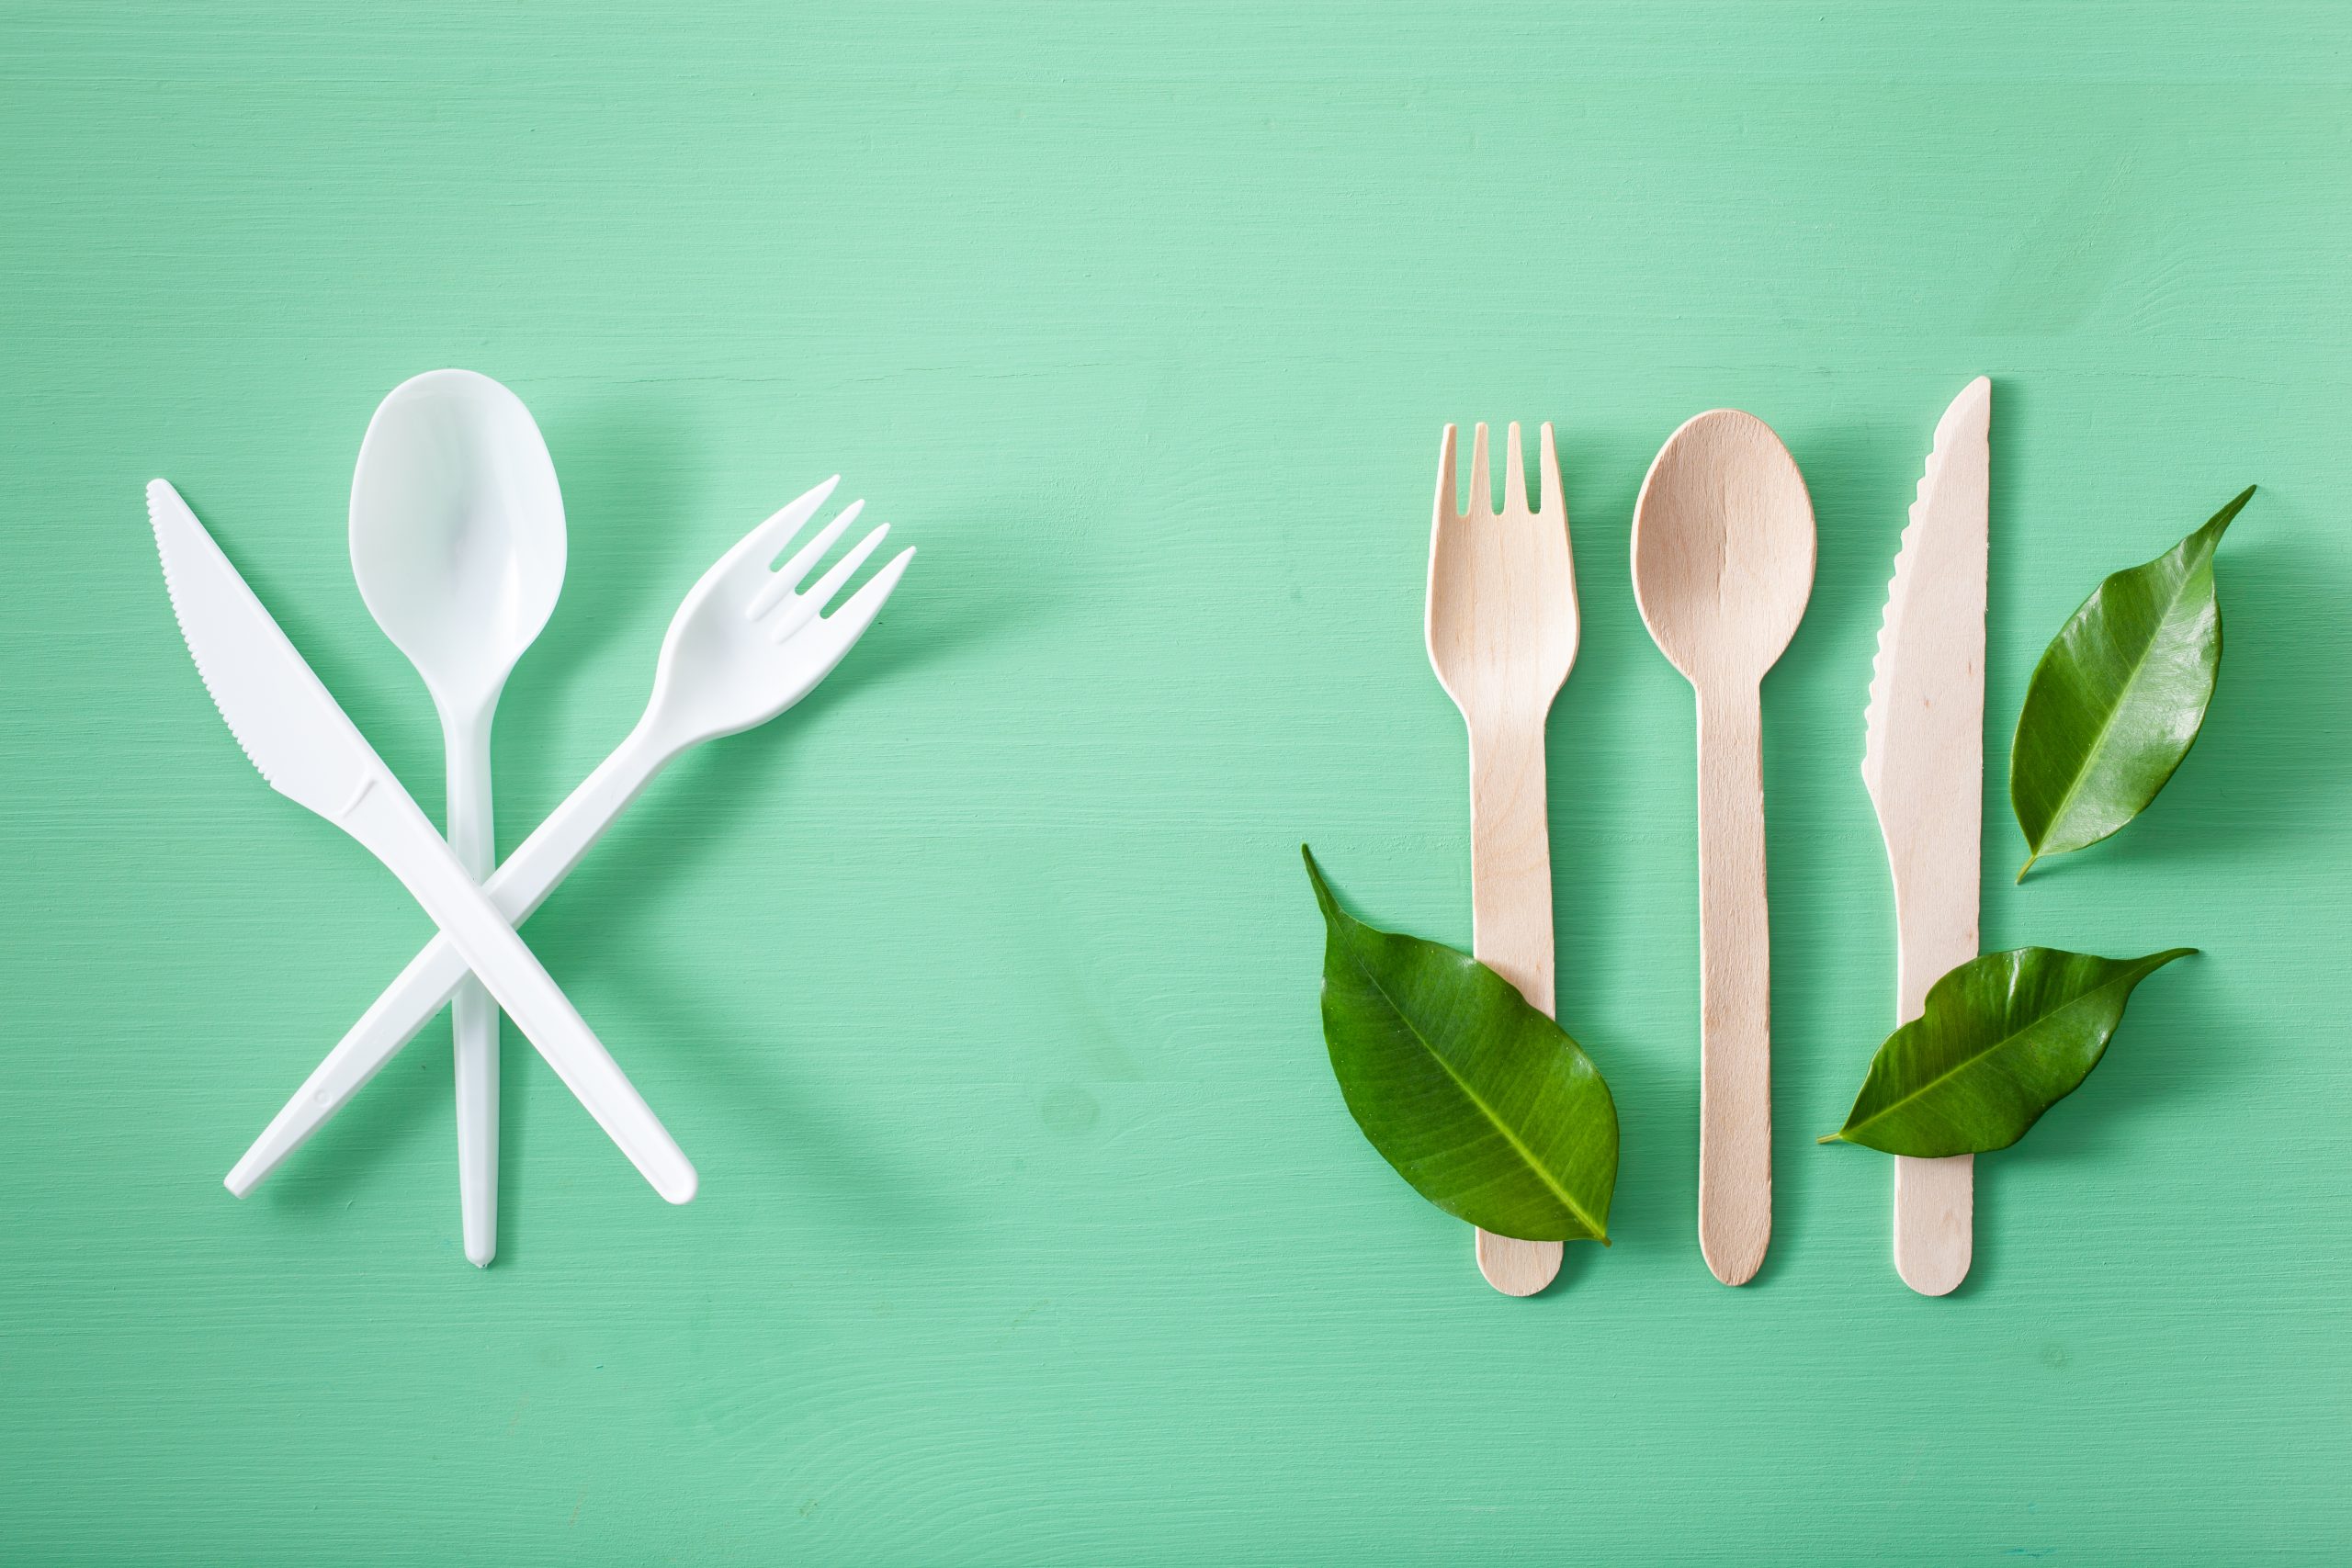 Time to wave goodbye to single-use eating utensils